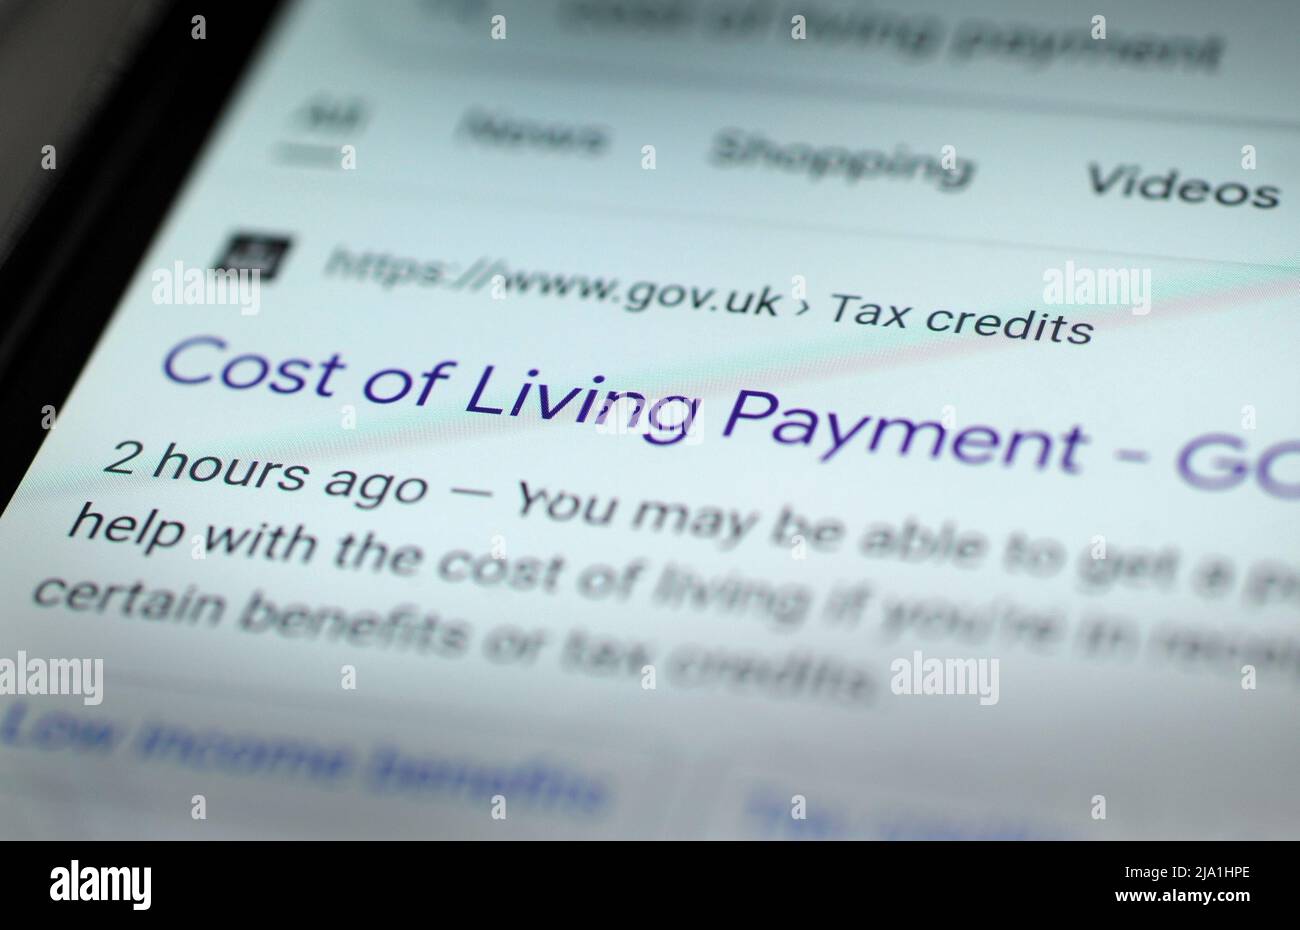 GOVERNMENT COST OF LIVING PAYMENT INFORMATION ON SMARTPHONE SCREEN RE COST OF LIVING CRISIS FUEL BILLS ELECTRICITY GAS BENEFITS SUPPORT PACKAGE ETC UK Stock Photo